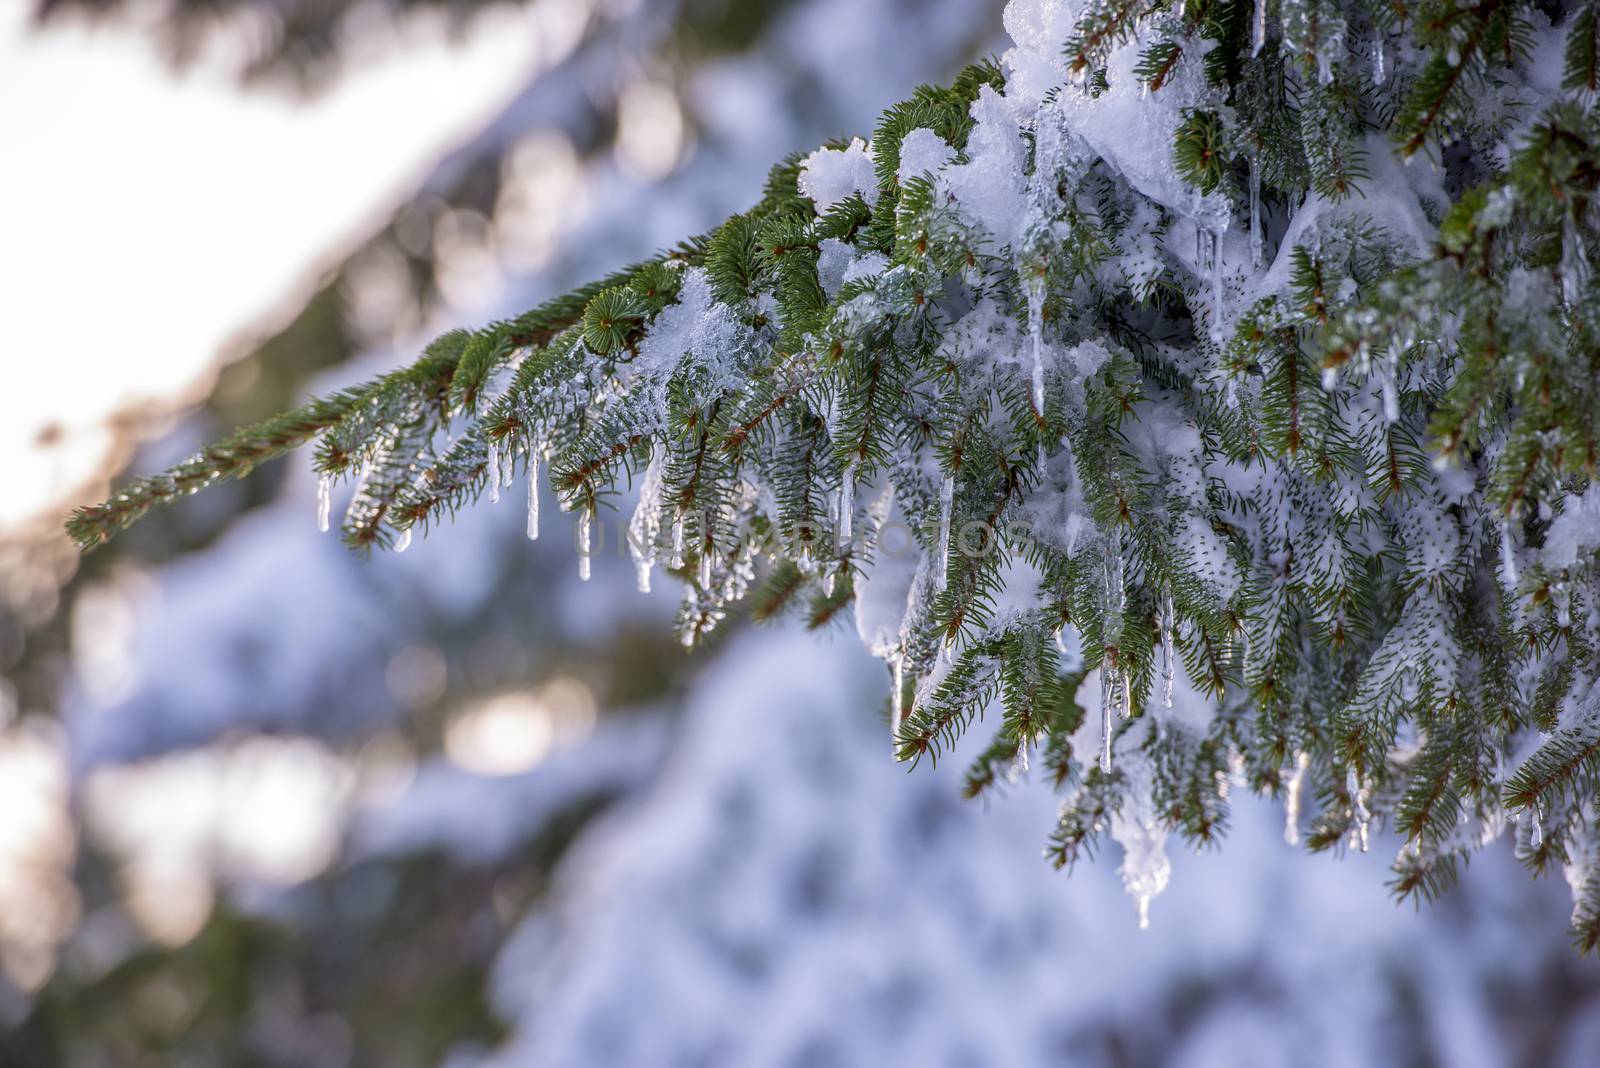 Spruce branches covered with snow and ice. Droplets of ice frozen on spruce needles and twigs, selective focus.